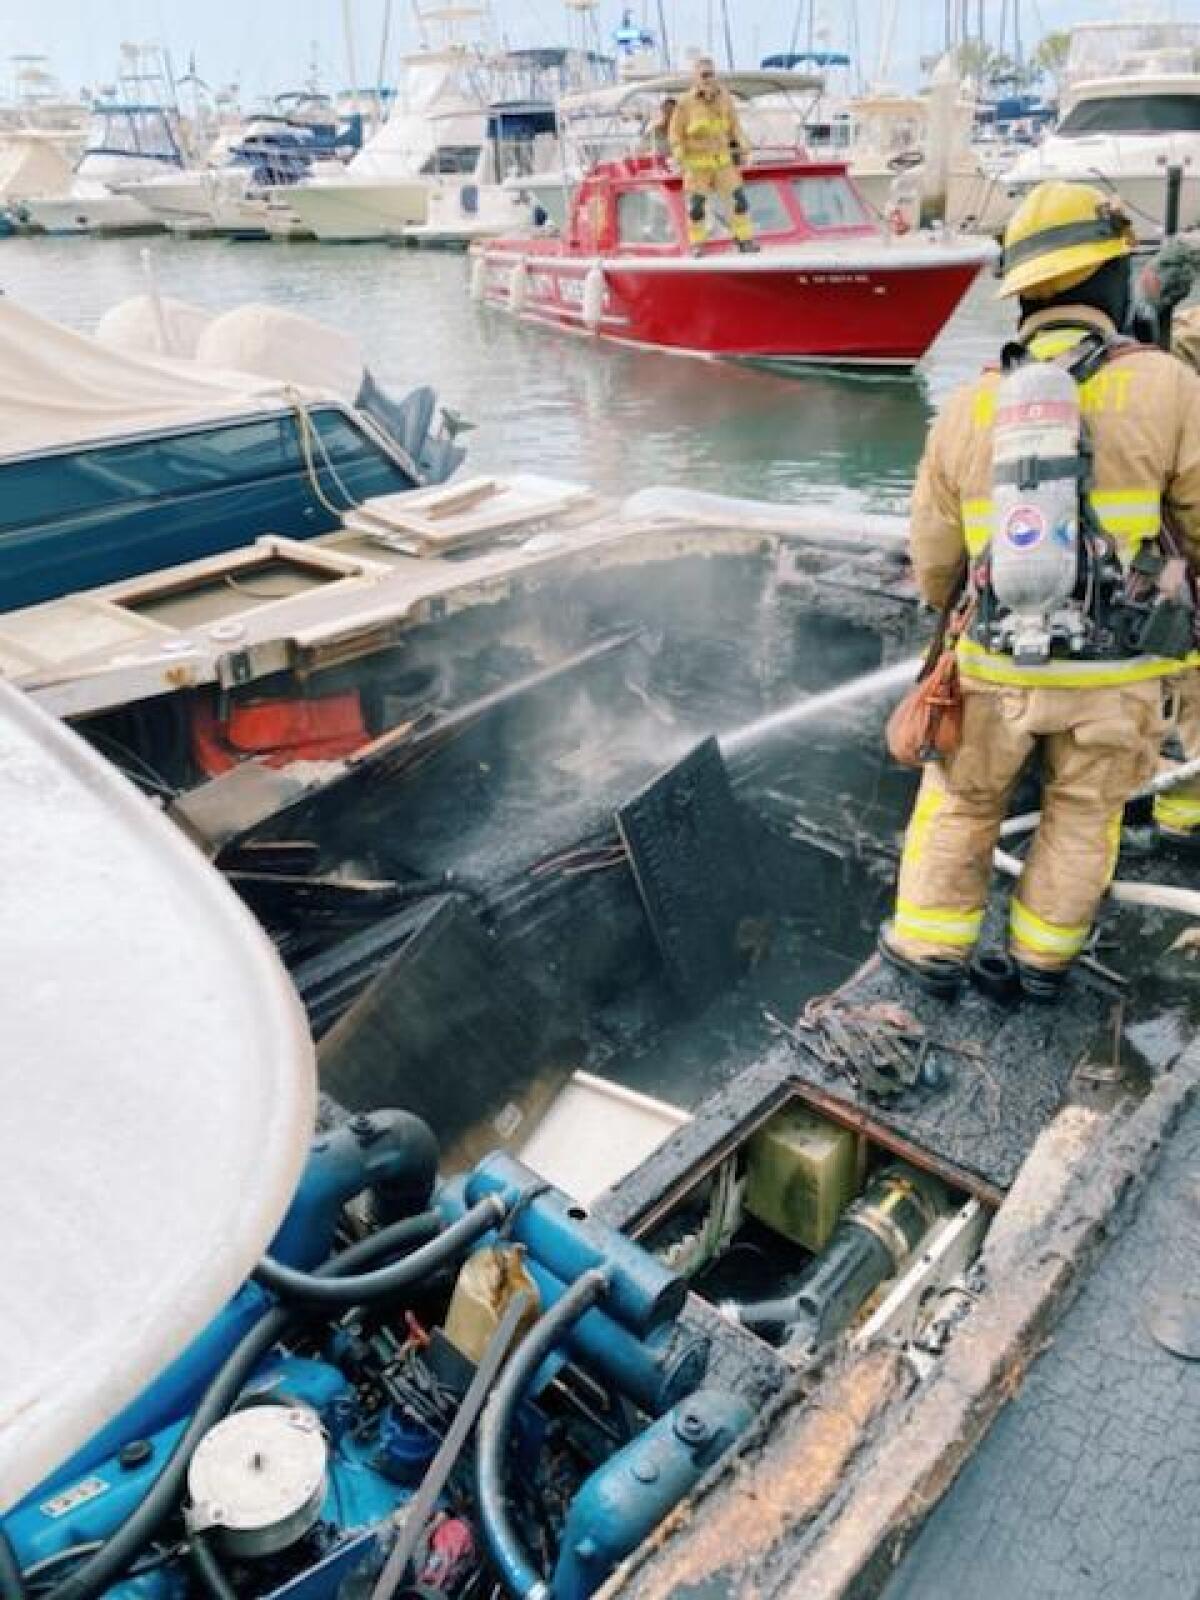 A firefighter stands in the wreckage of one of the boats damaged in a fire at the Balboa Yacht Basin.